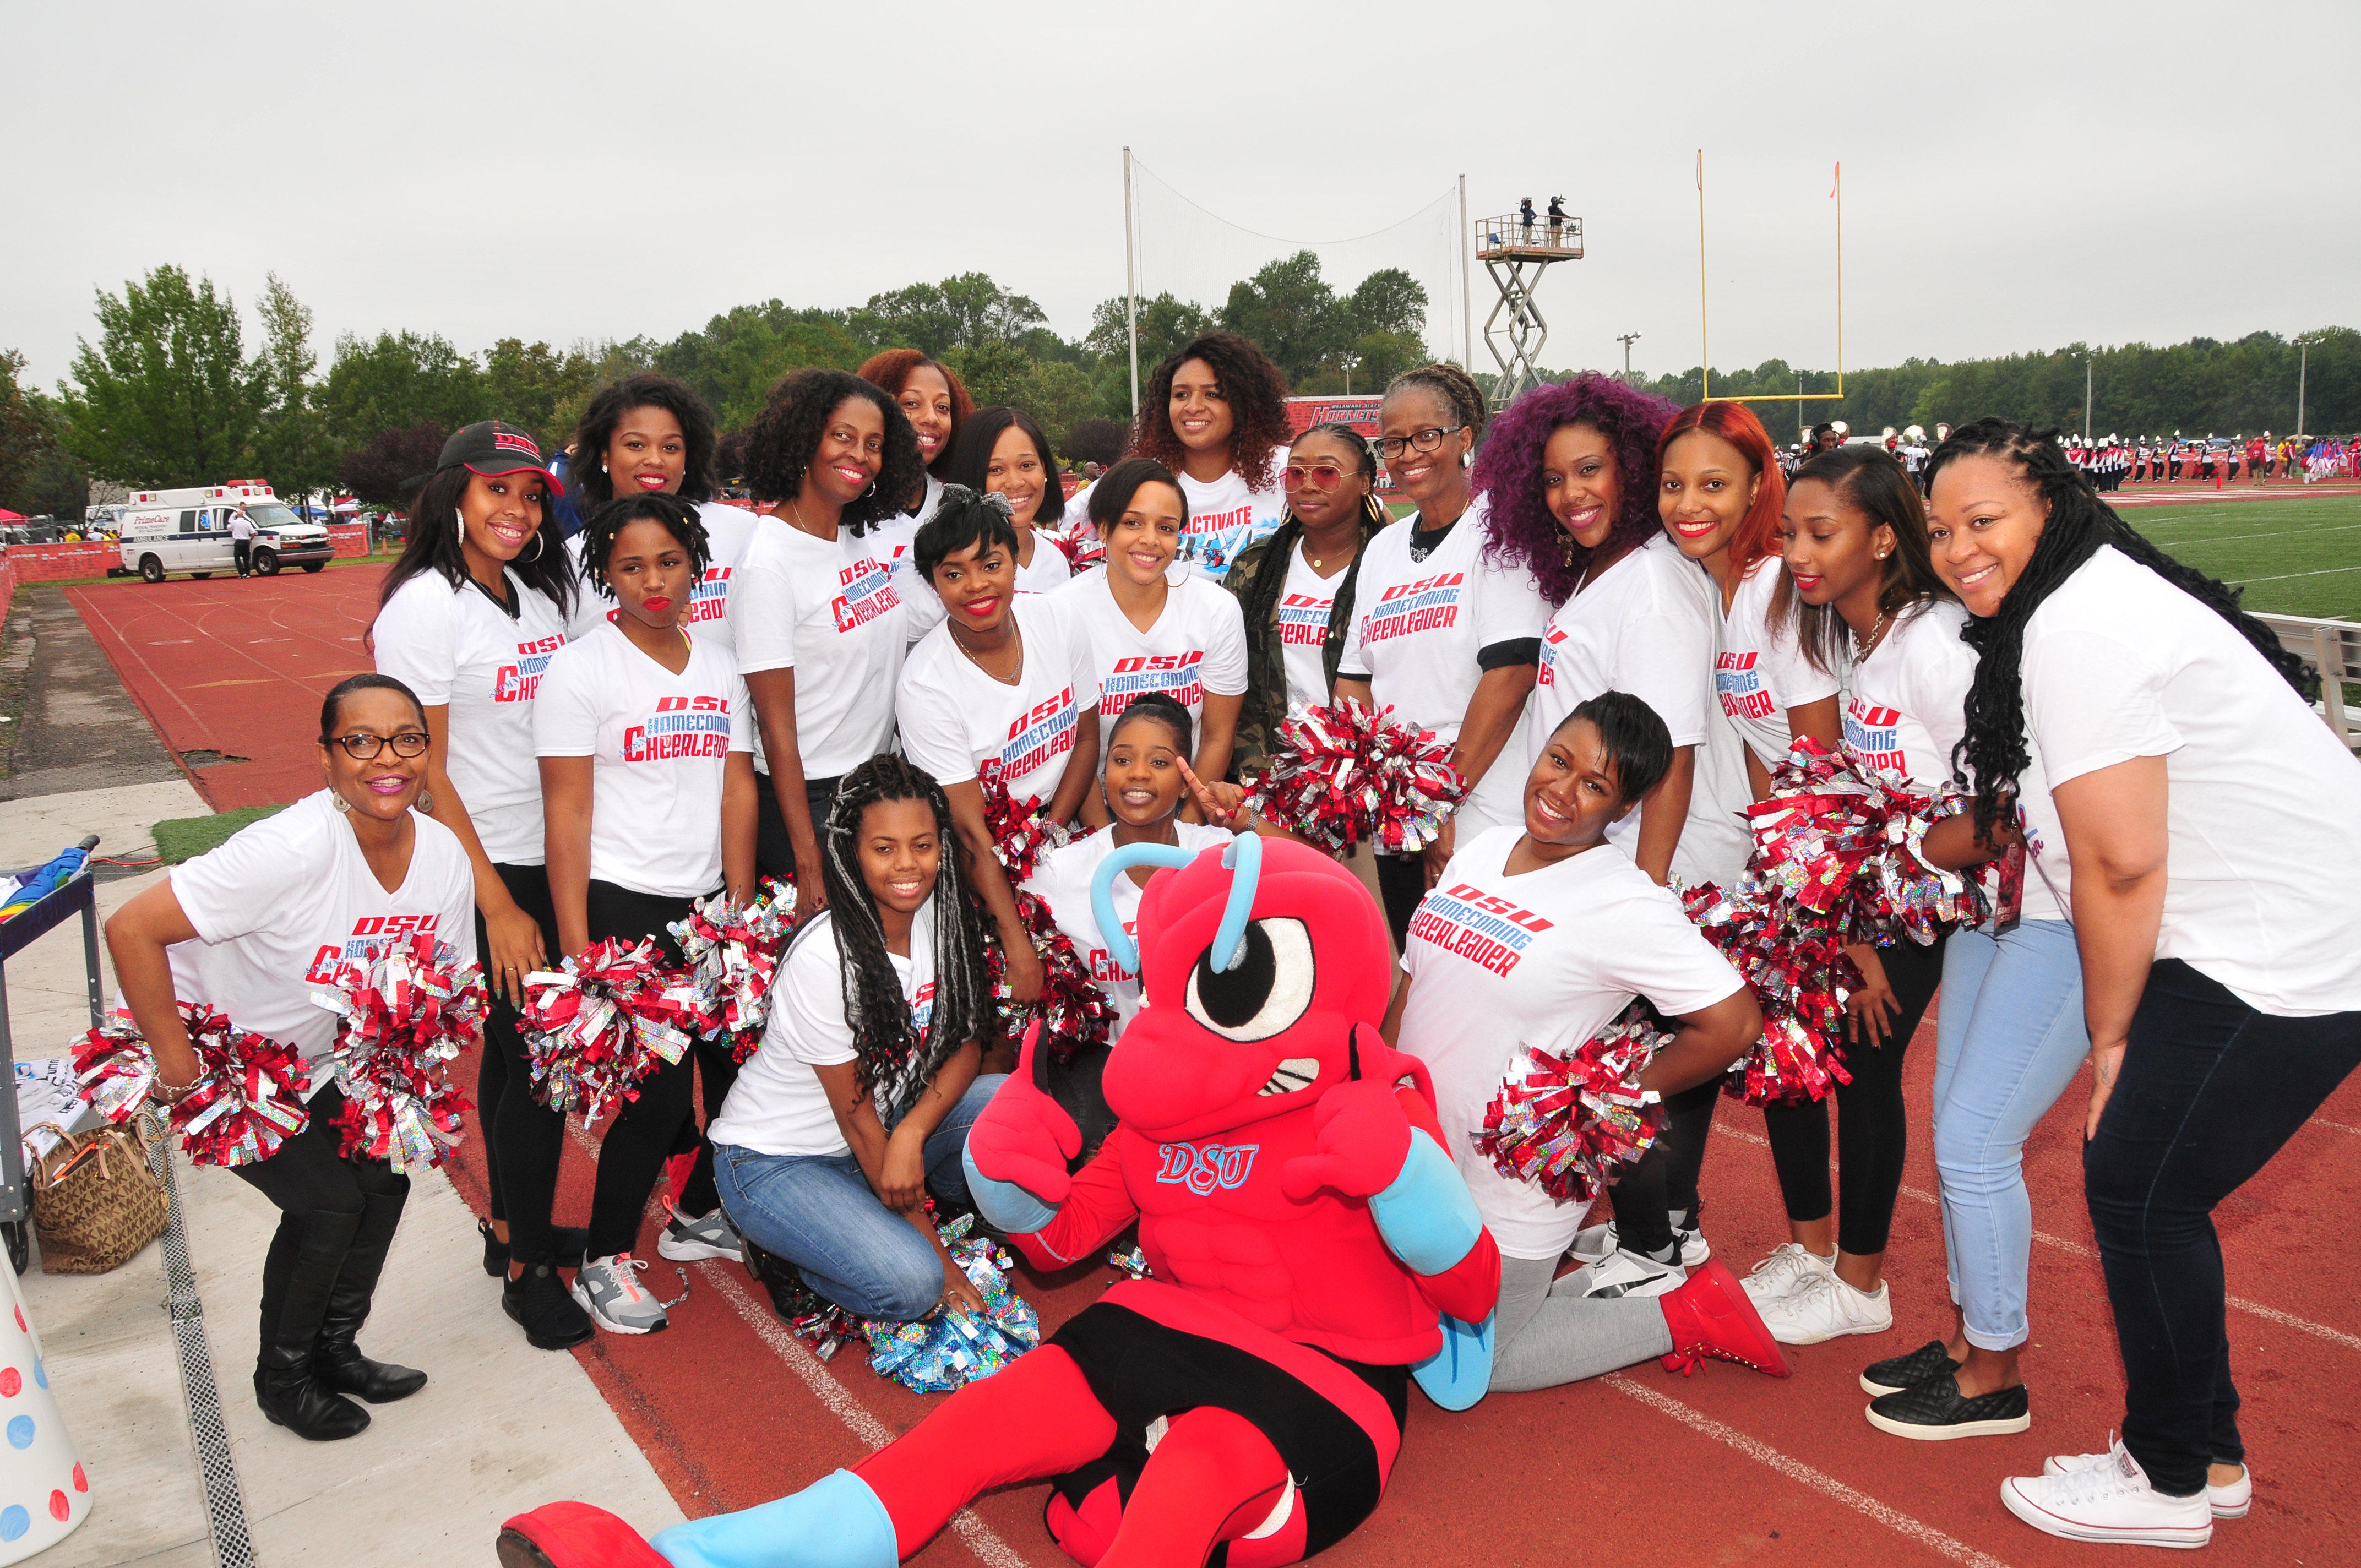 A good number of former DSU cheerleaders not only returned to their alma mater for the 2017 Homecoming Weekend, but also performed with the current cheerleader during the football game, keeping up with them step for step and showing that they still have the moves.